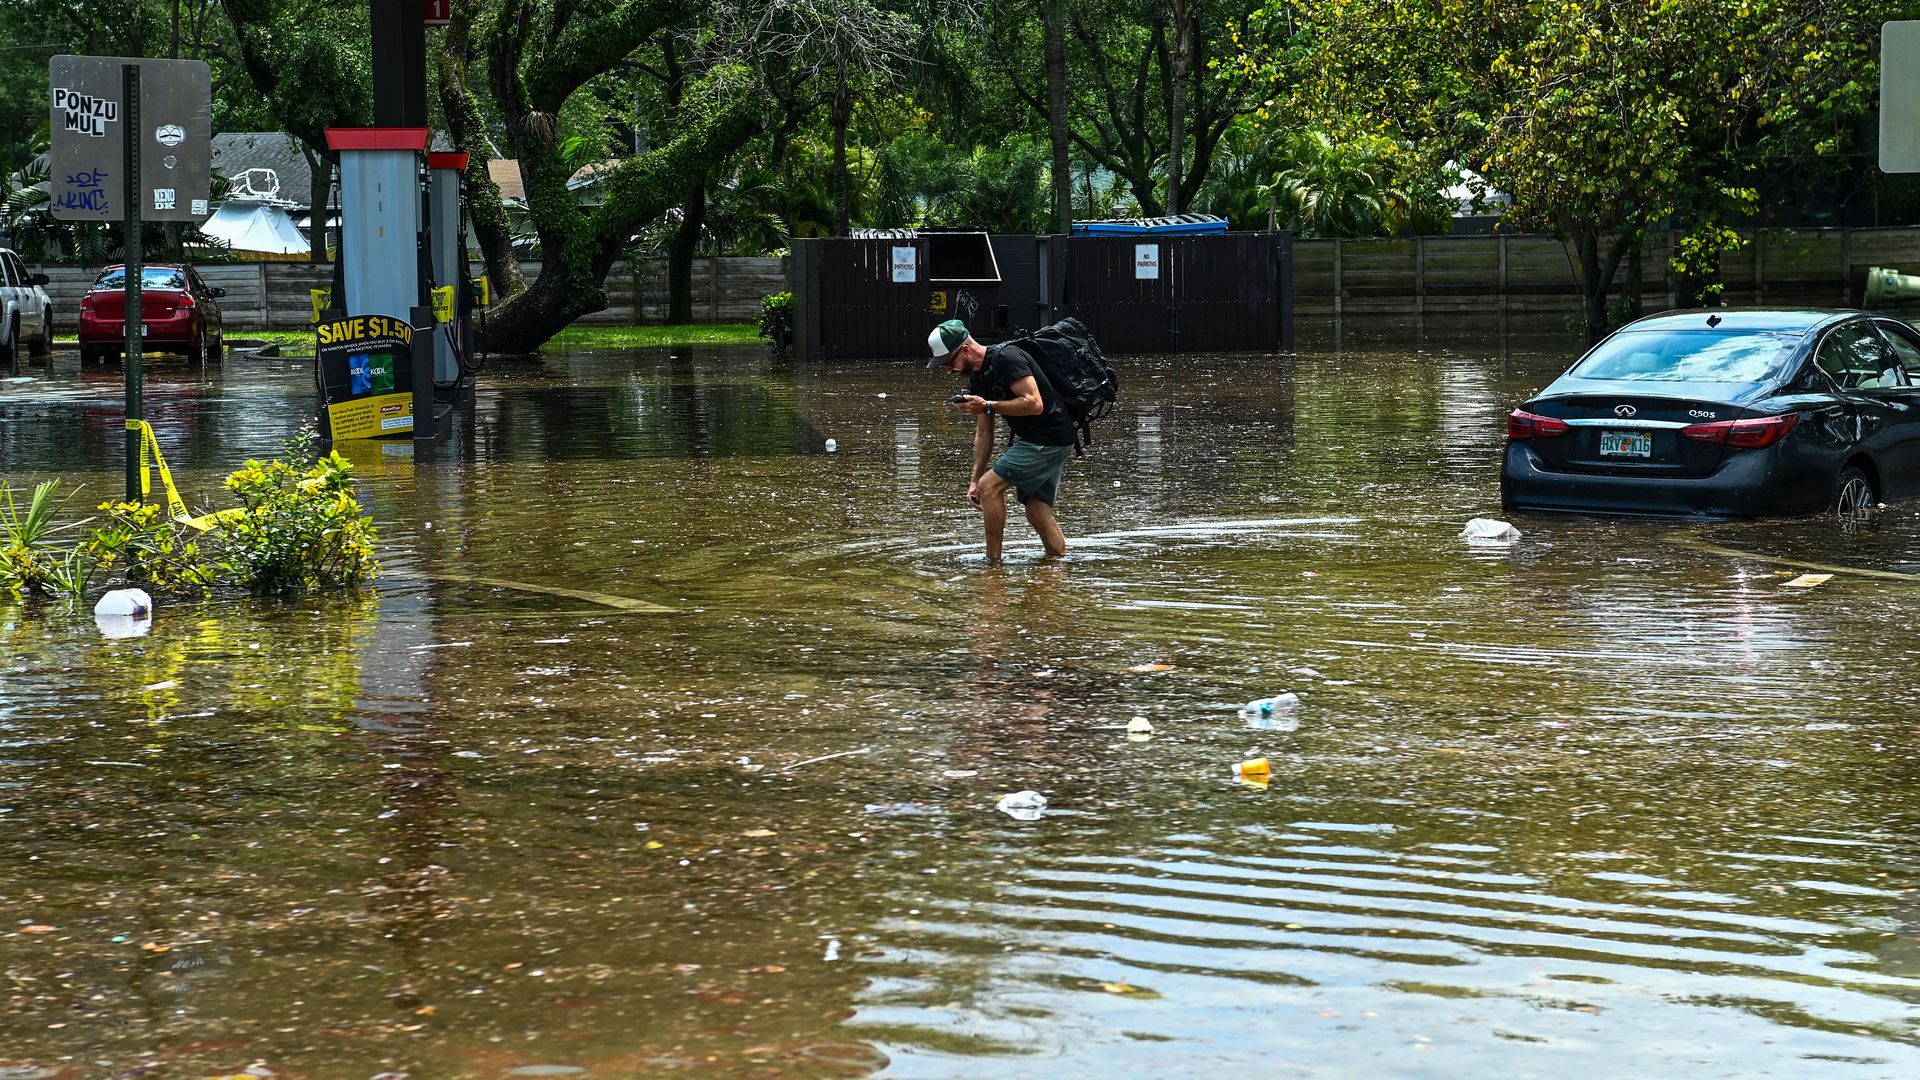 A man wades through a flooded street, near a partially submerged car and gas station